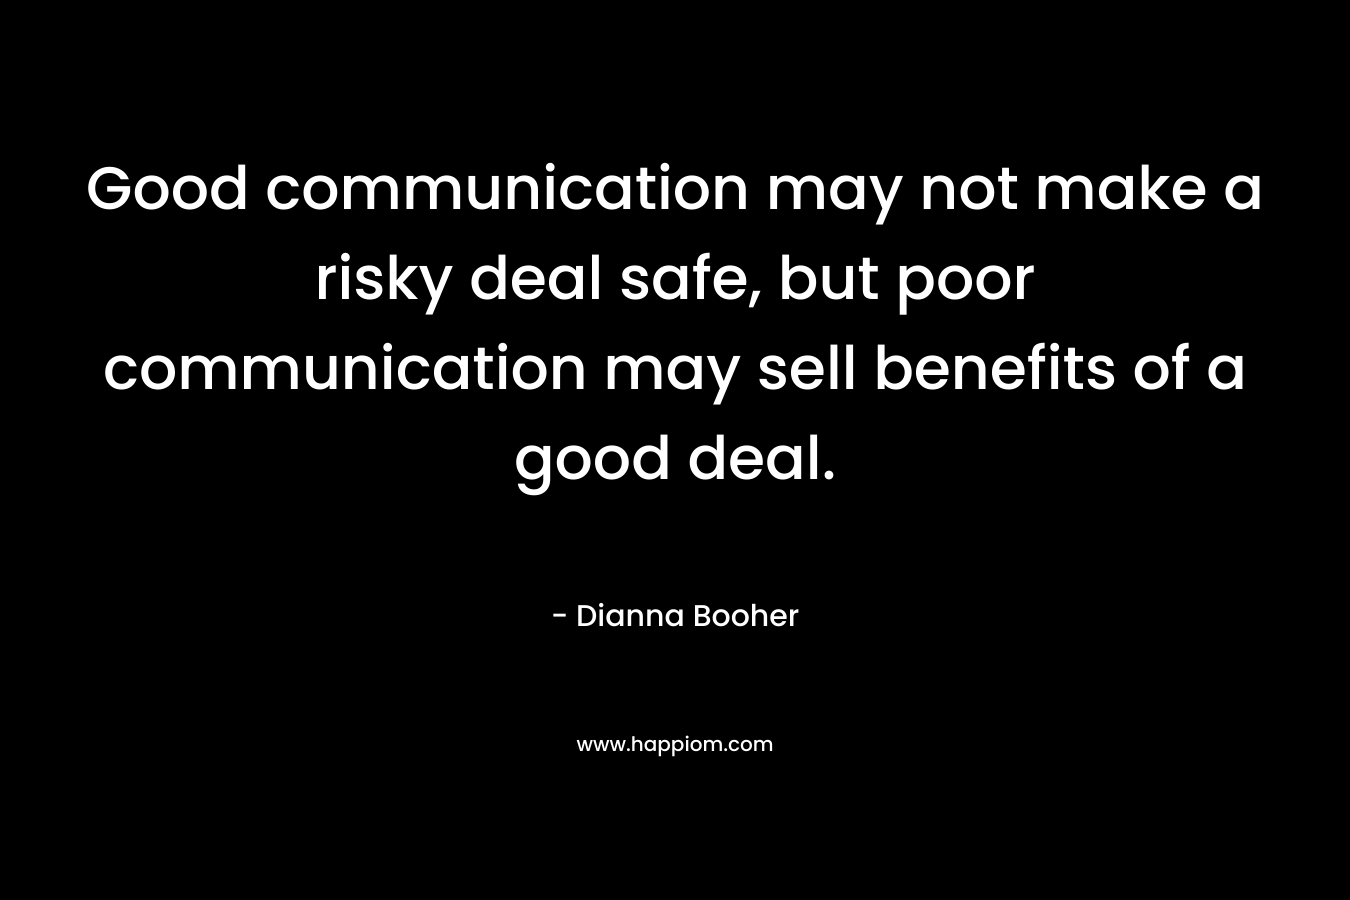 Good communication may not make a risky deal safe, but poor communication may sell benefits of a good deal.